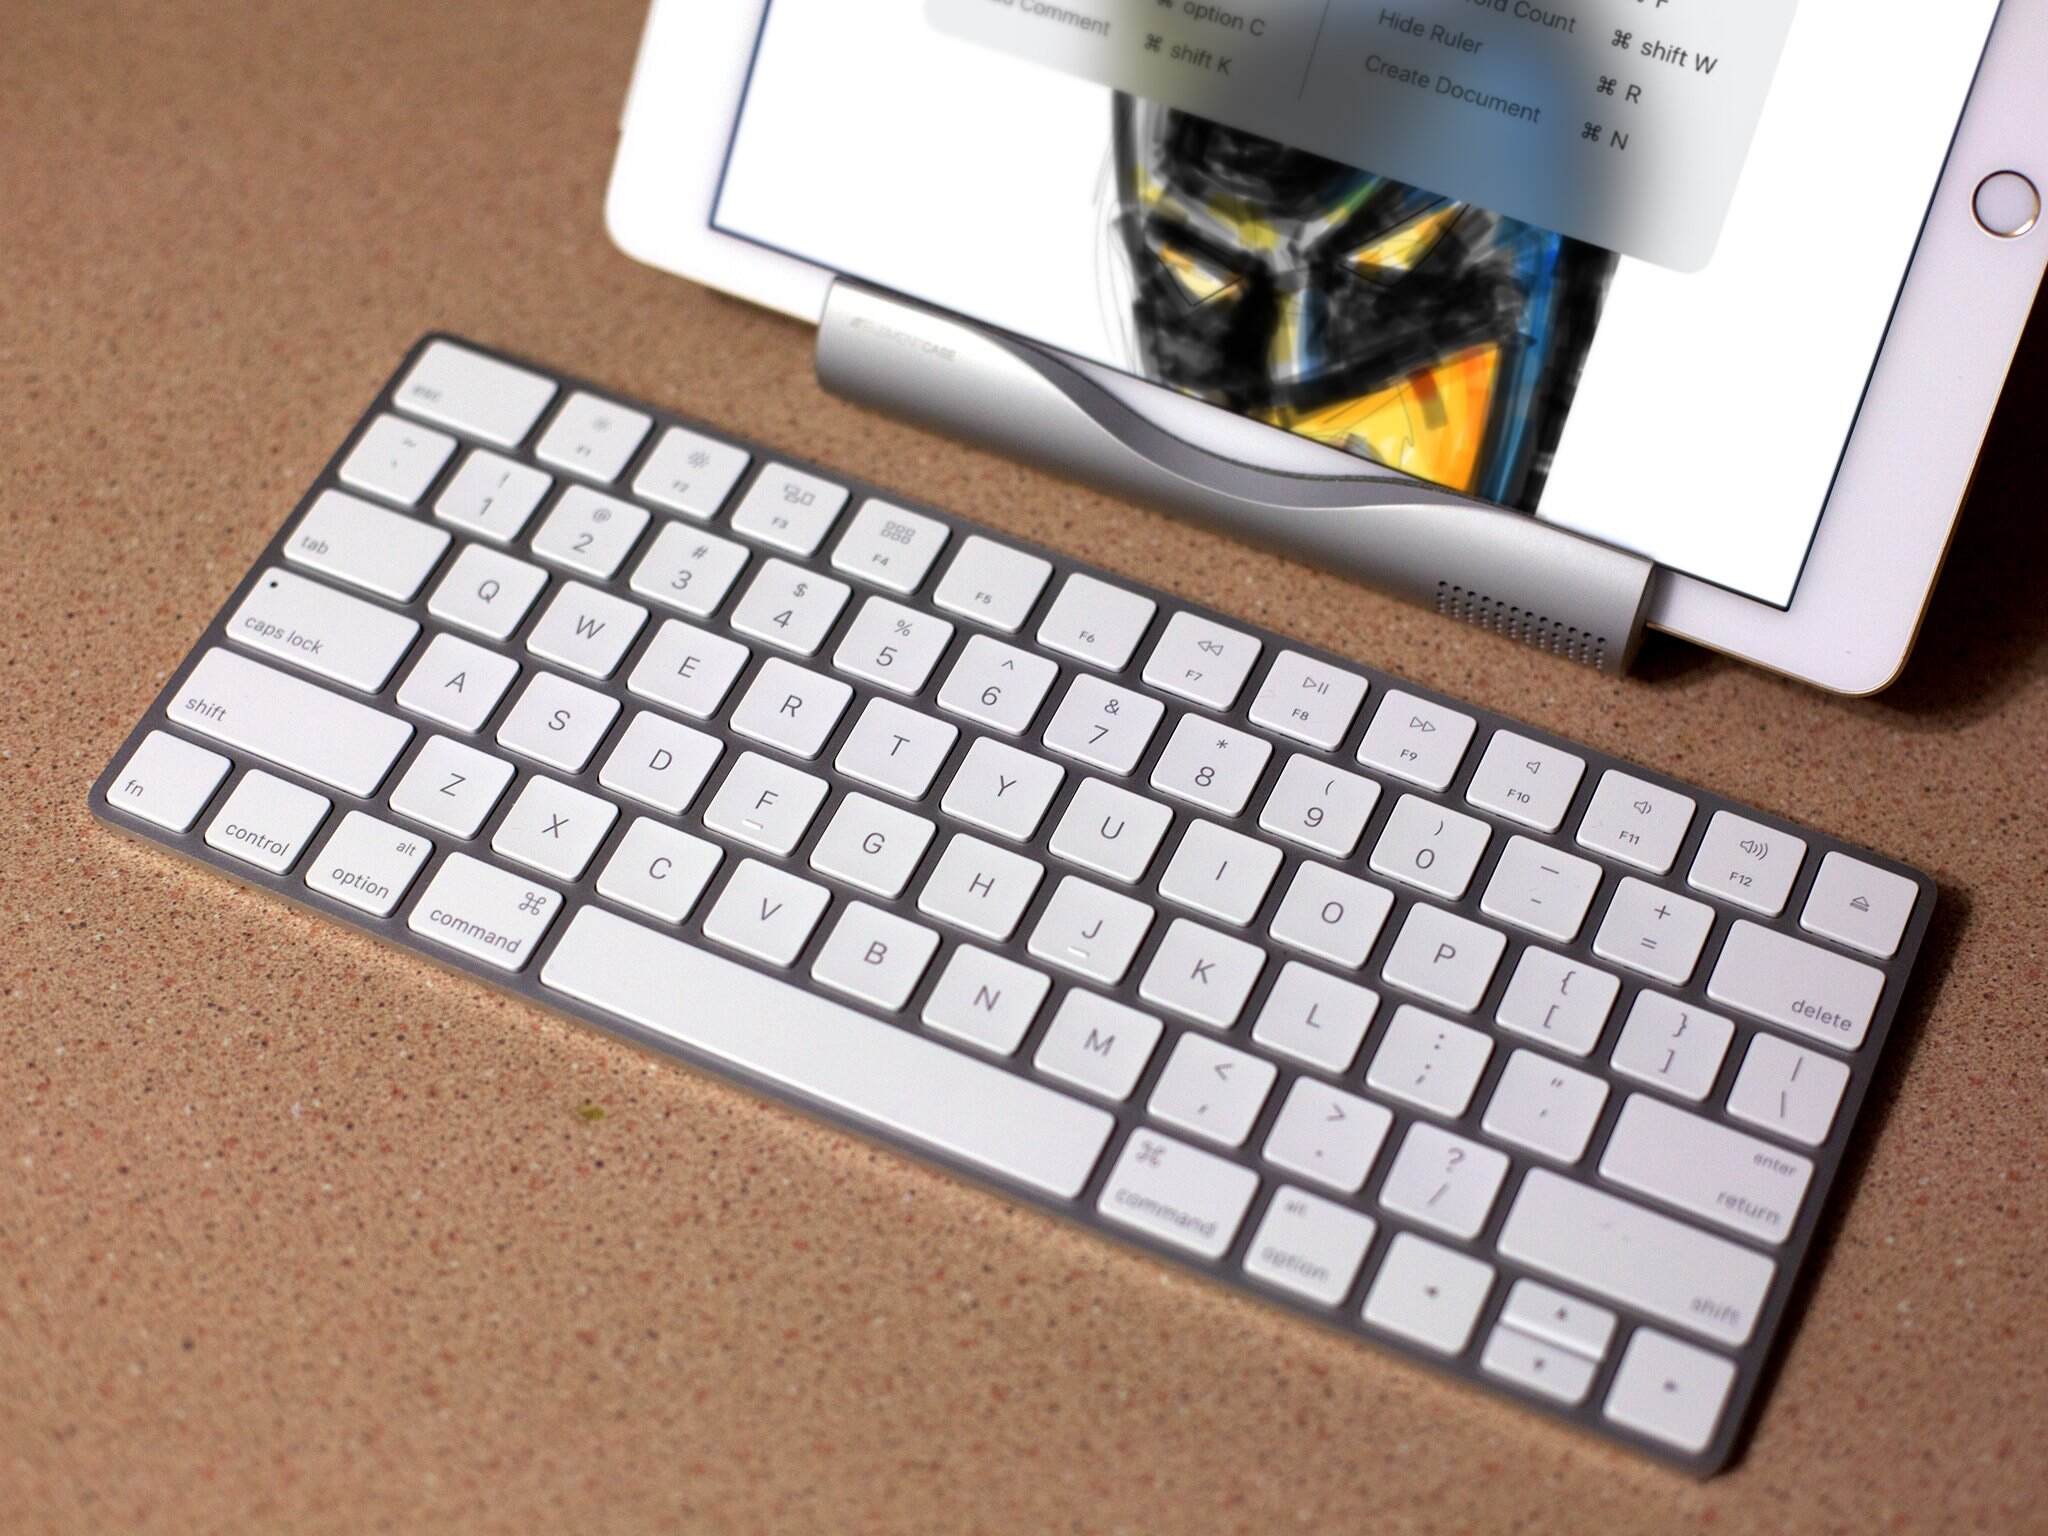 How To Connect A Wireless Keyboard To iPad | CellularNews